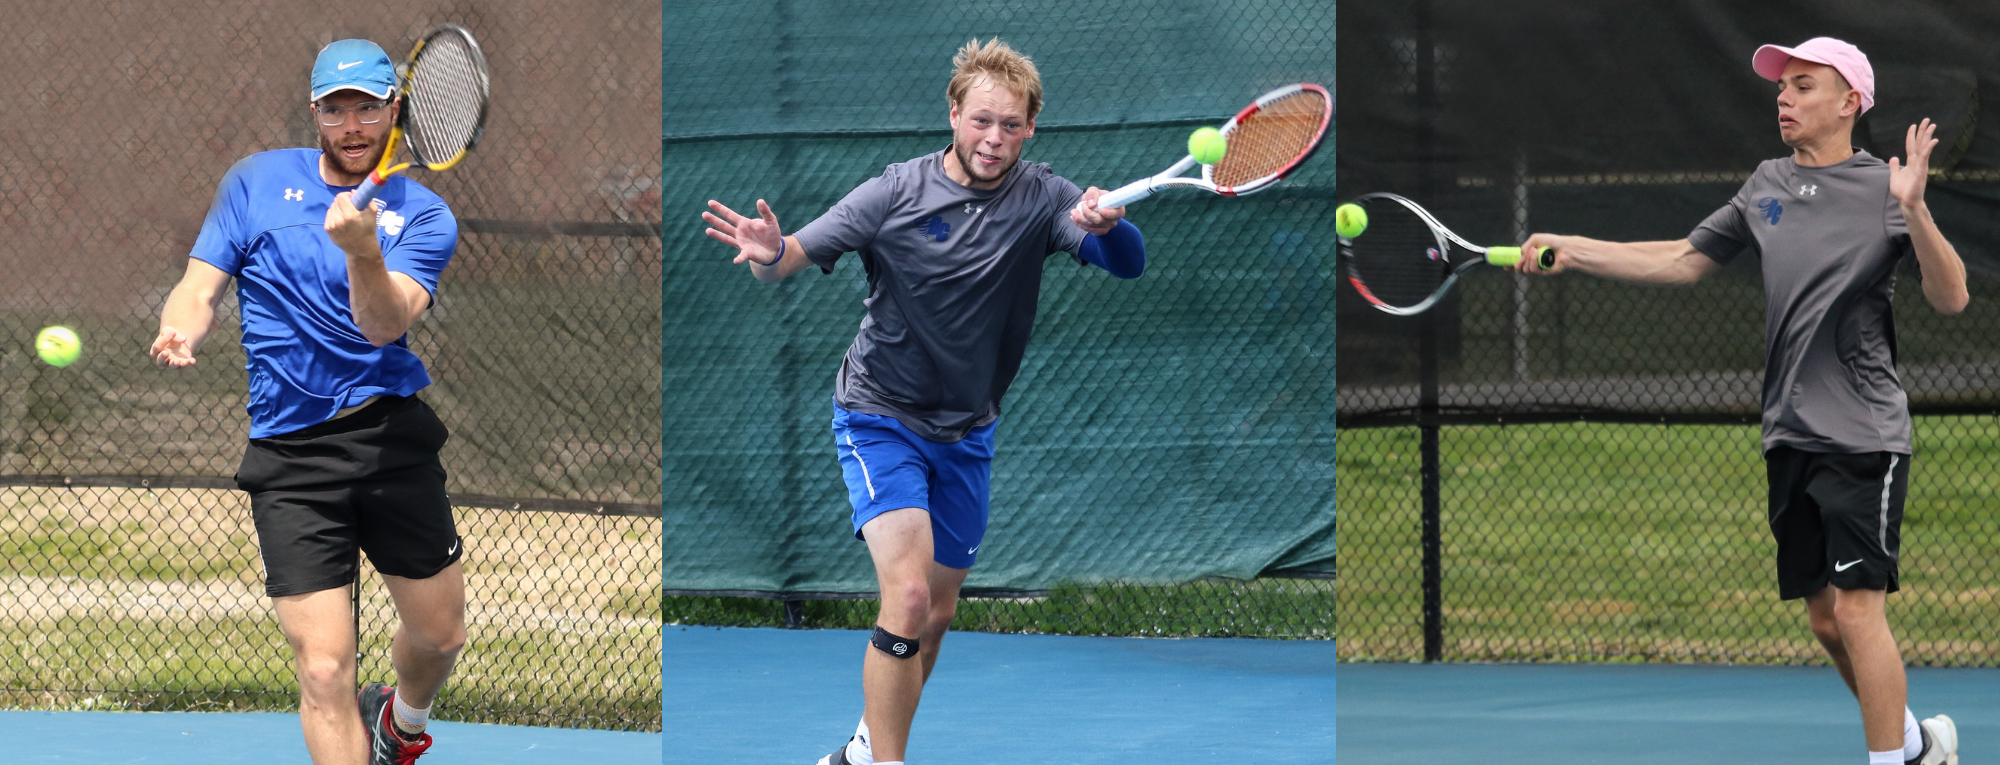 Mittring, Hengst, Frazee Cap off Perfect USA South Seasons in Singles Play